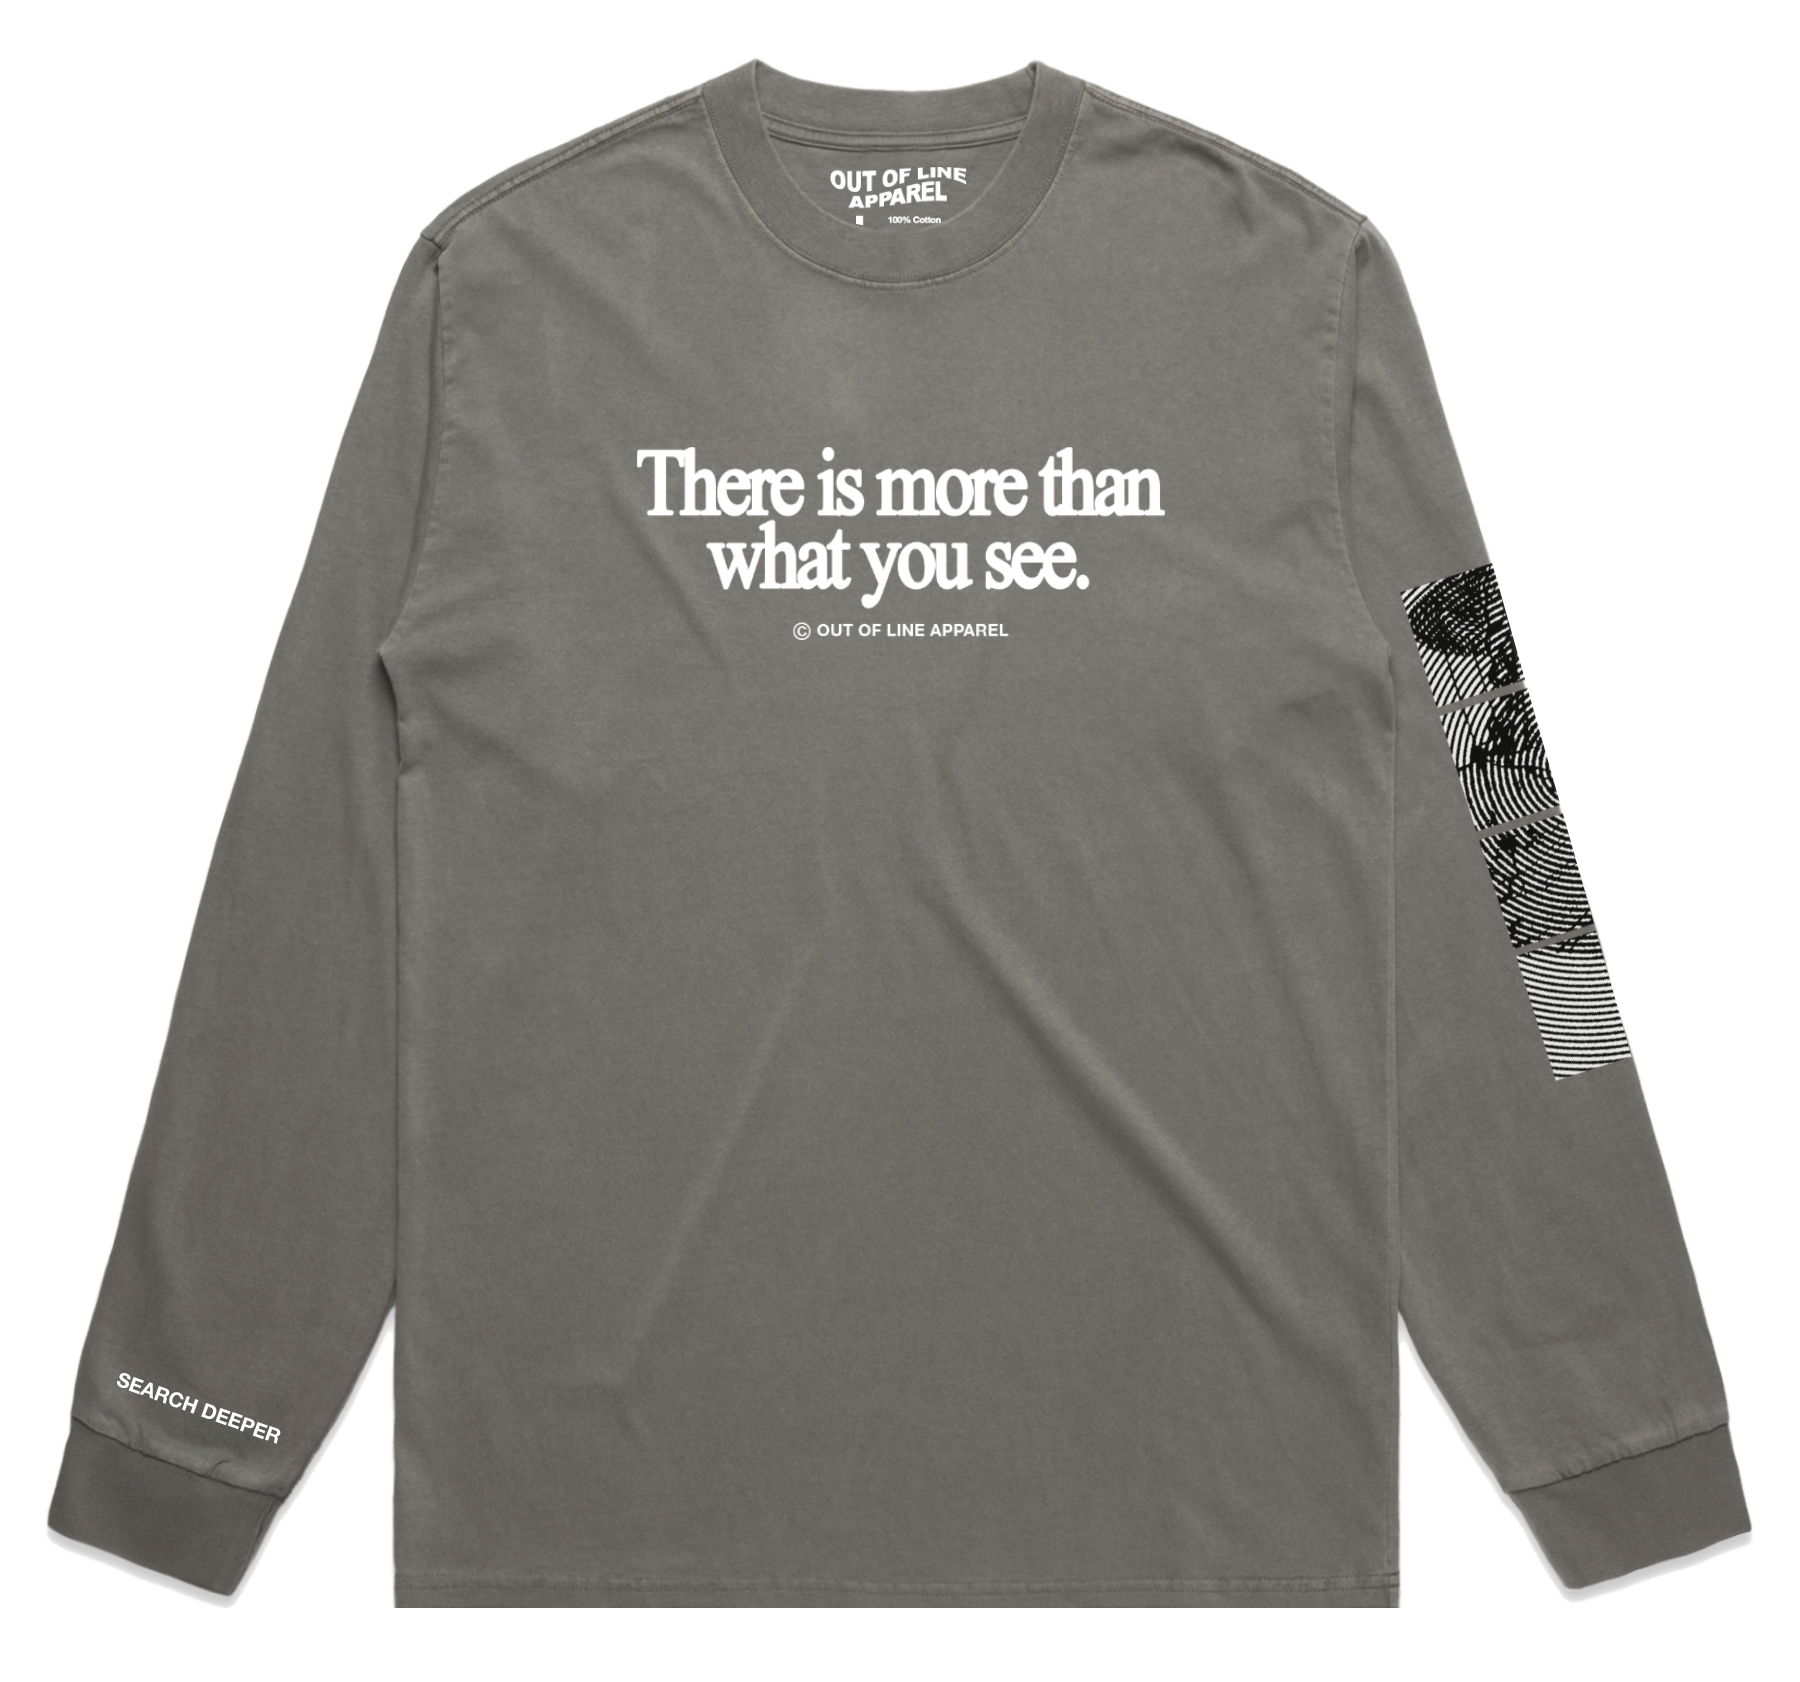 FADED GREY "THERE IS MORE" LONG SLEEVE TEE